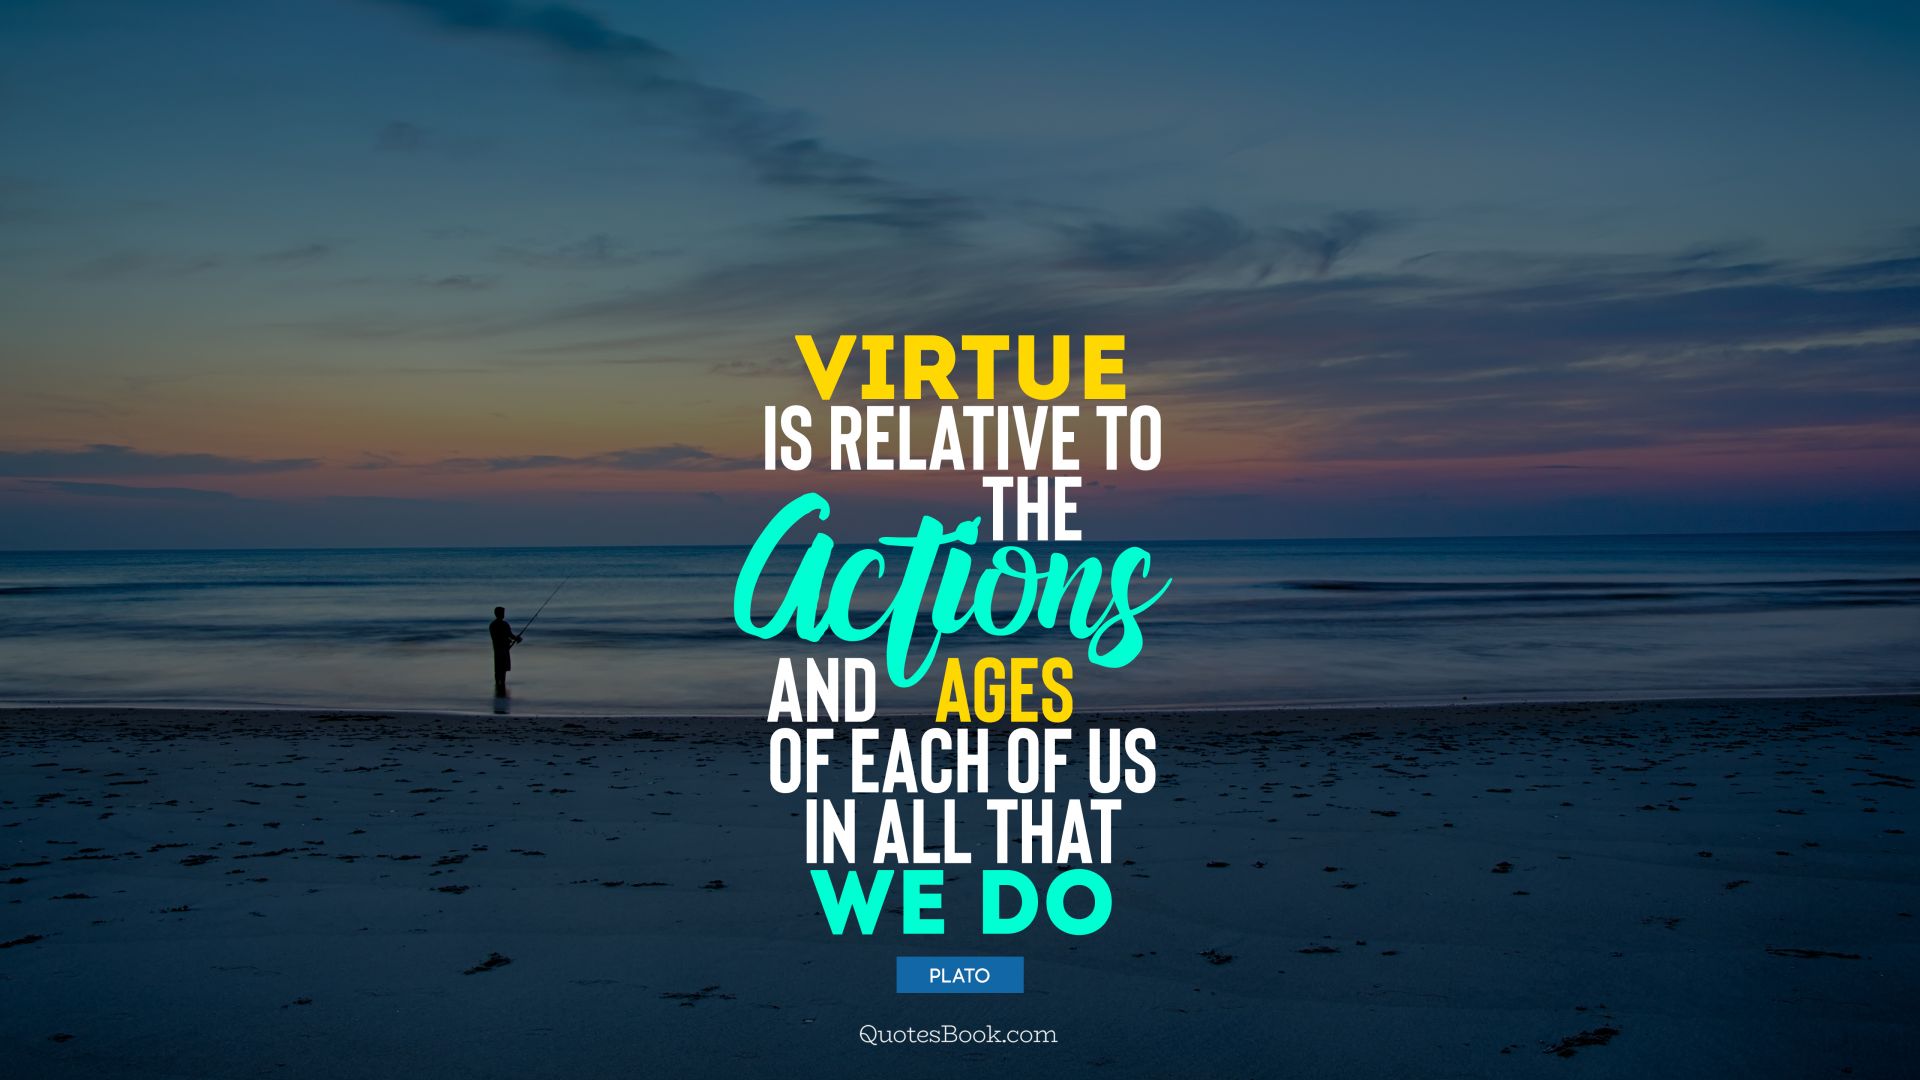 Virtue is relative to the actions and ages of each of us in all that we do. - Quote by Plato